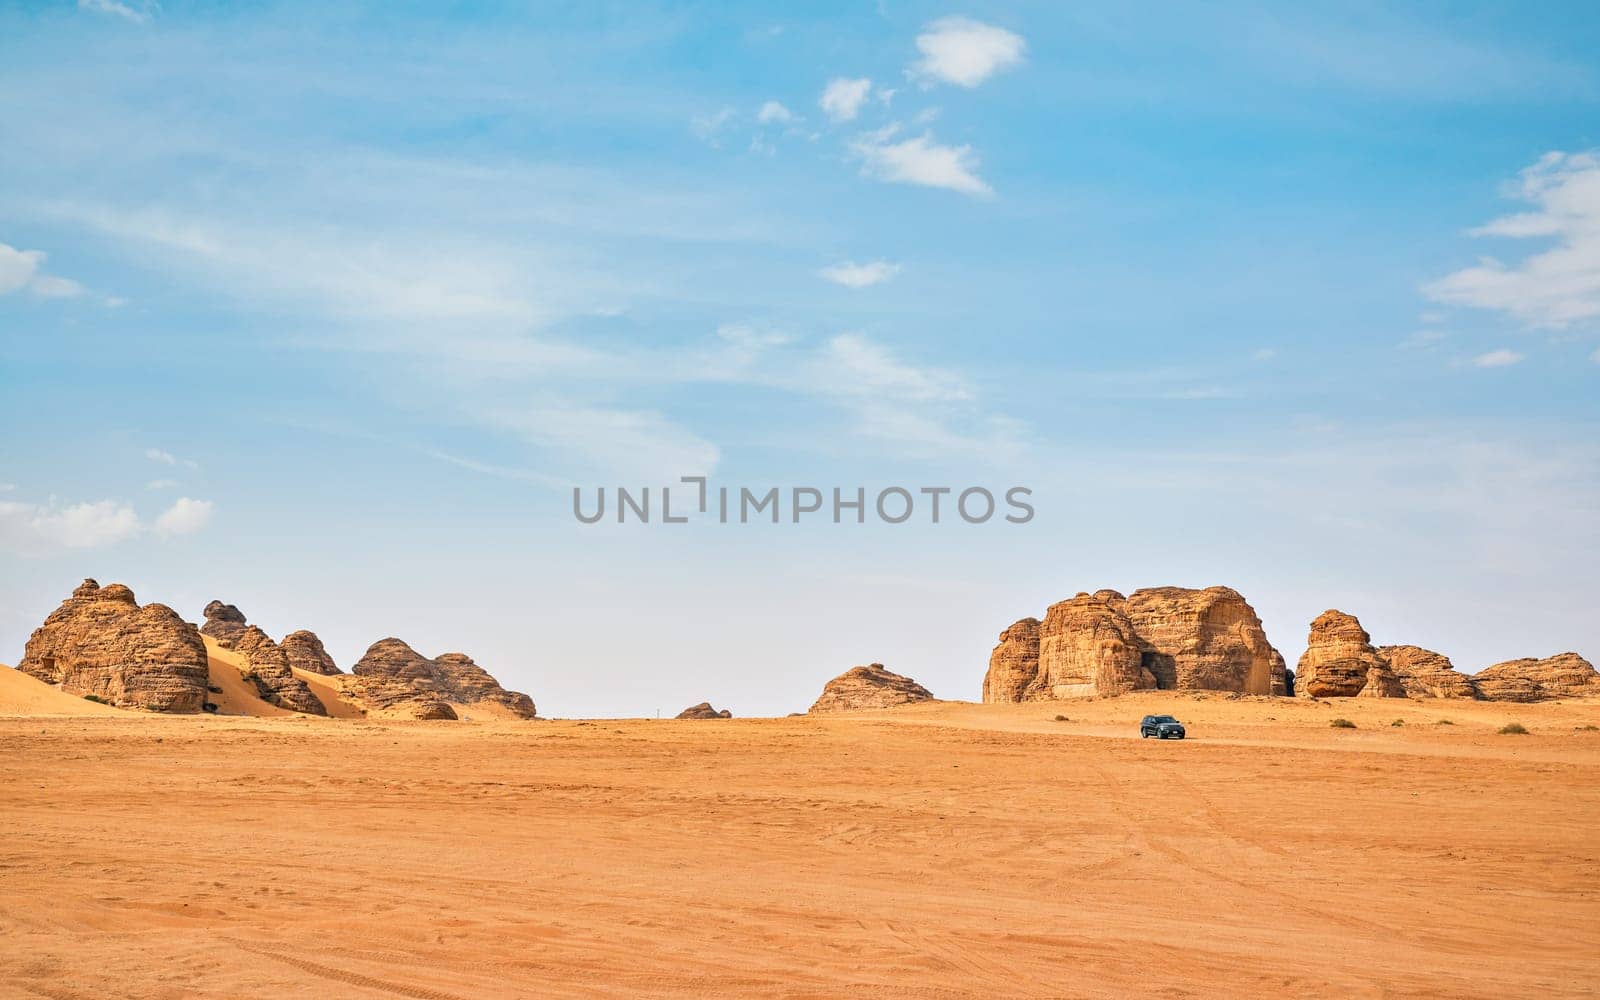 Typical desert landscape in Alula, Saudi Arabia, sand with some mountains, small offroad vehicle, local man and camels at distance.